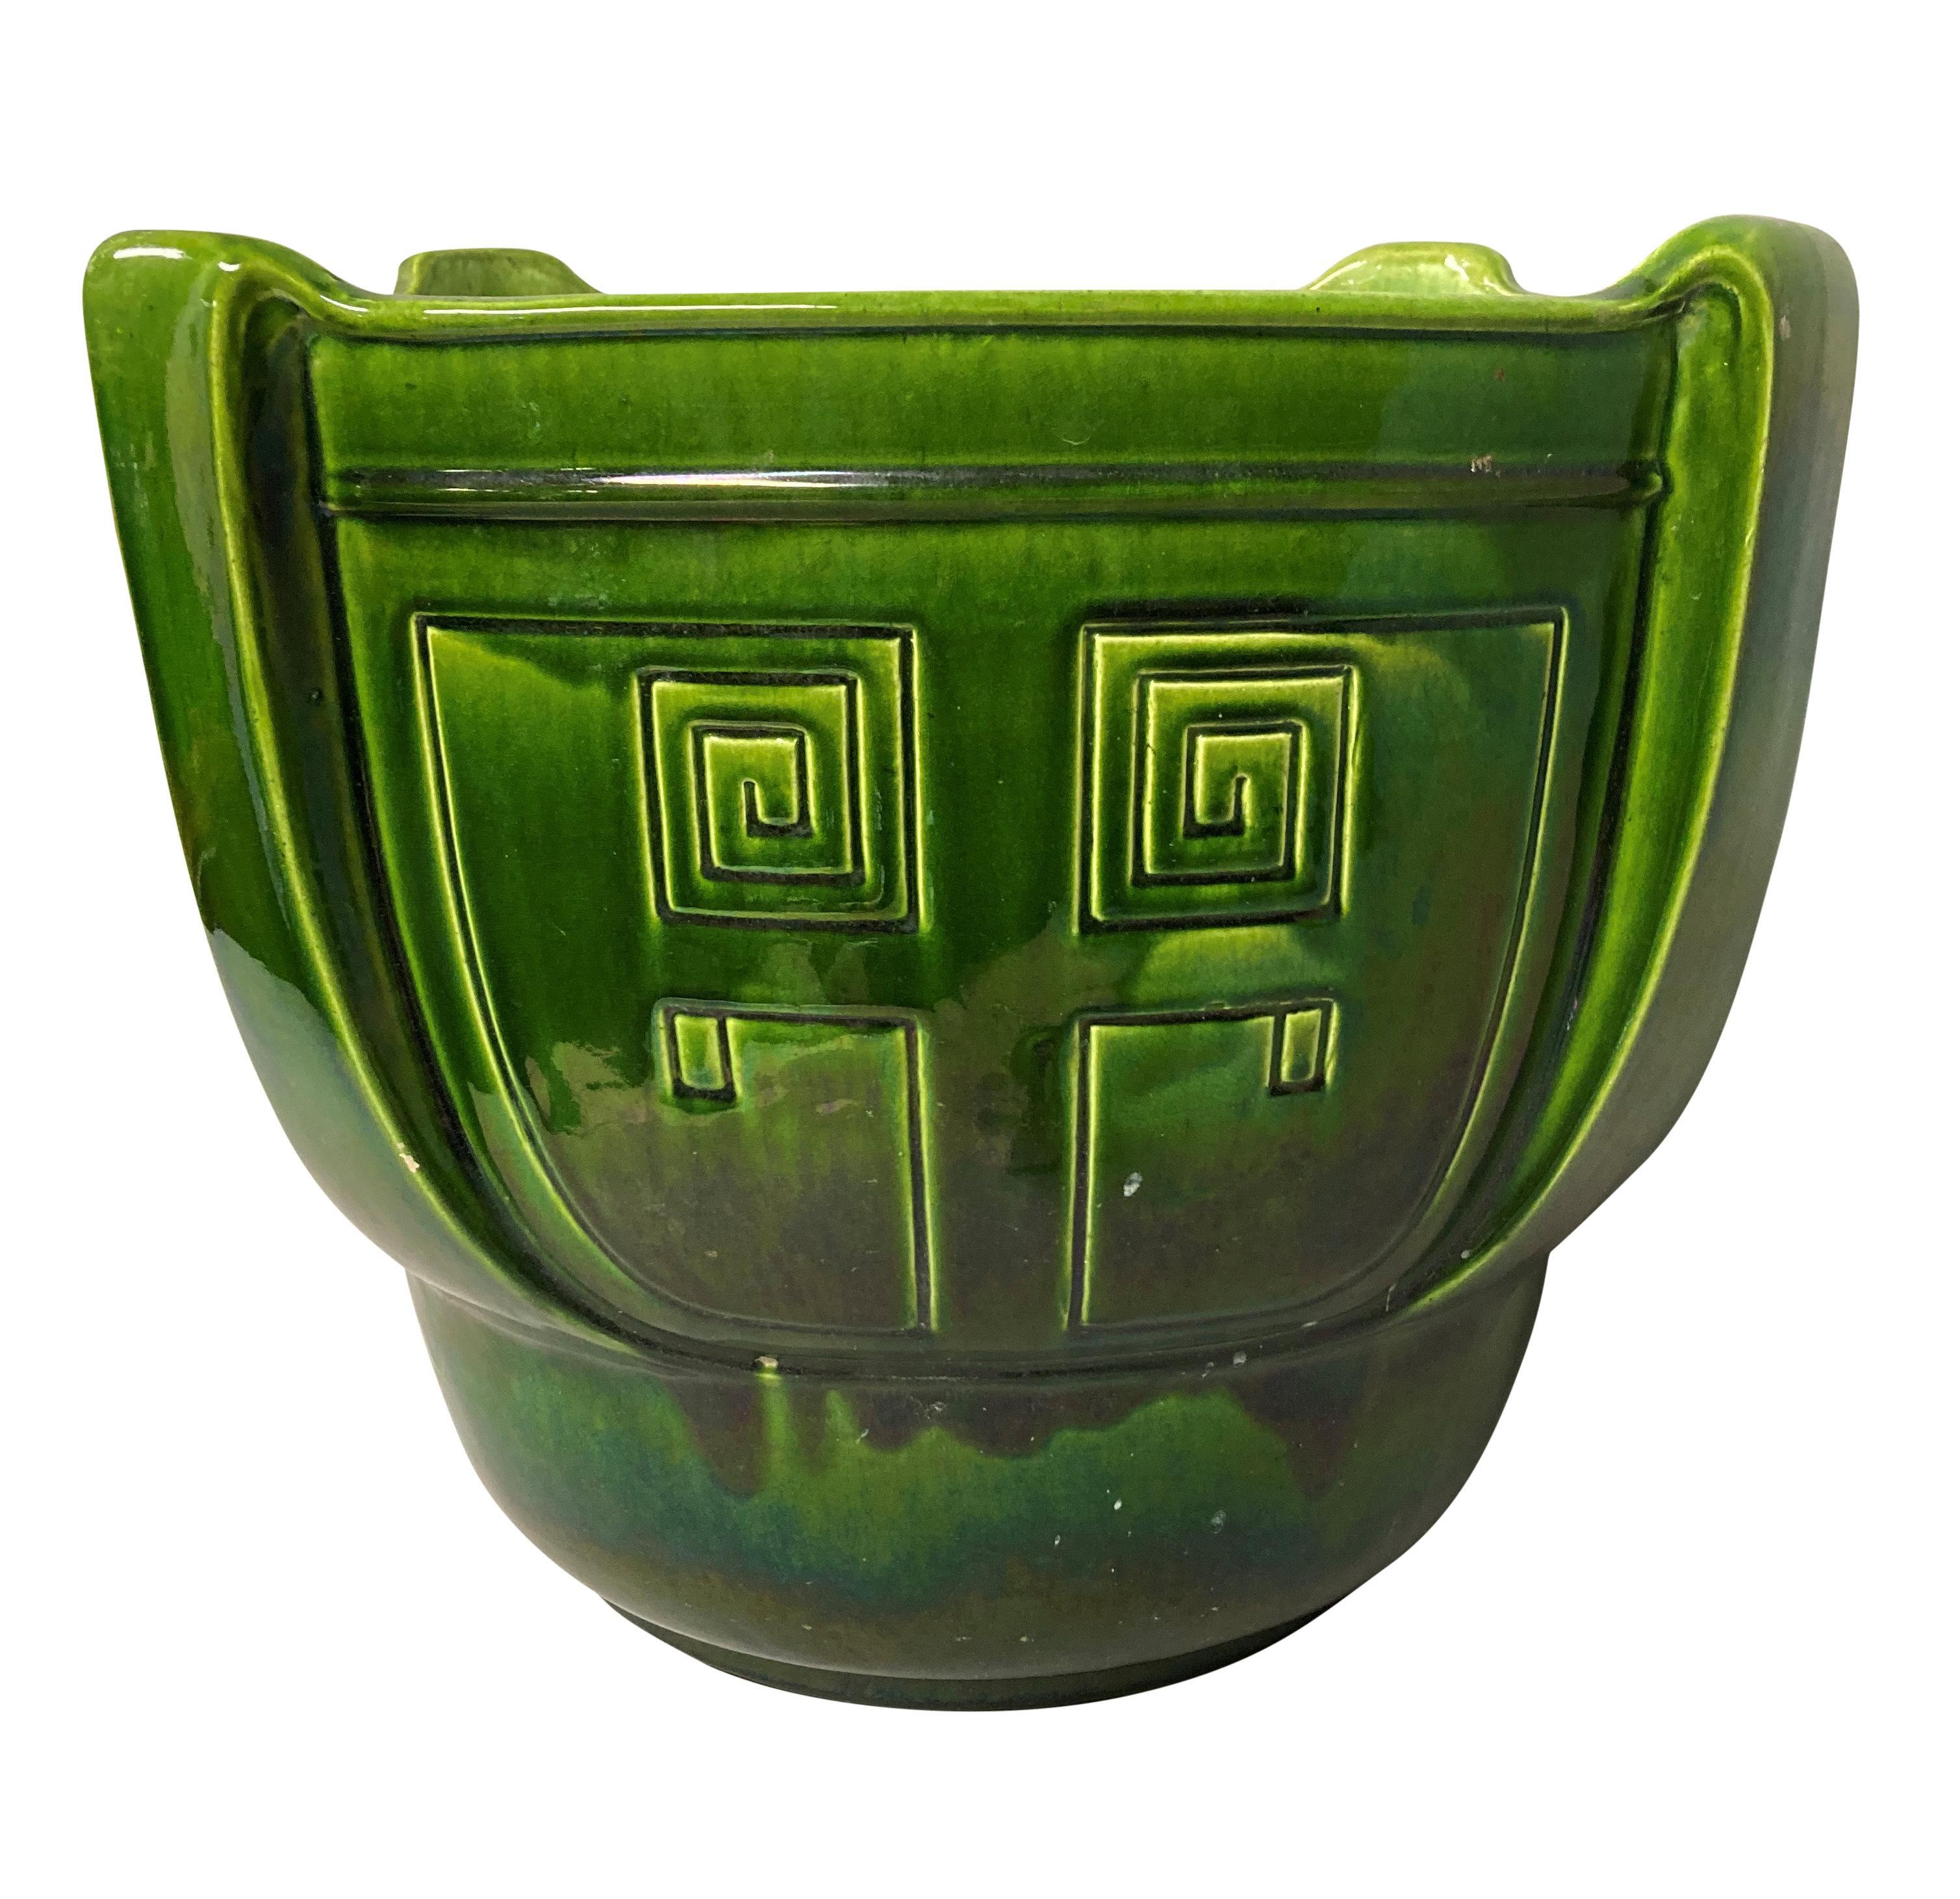 A large collection of English emerald glazed cache pot by Bretby and others. All in good condition apart from two small chips.
Measure: 43cm high x 33cm diameter (largest) 10cm high x 14cm diameter (smallest).